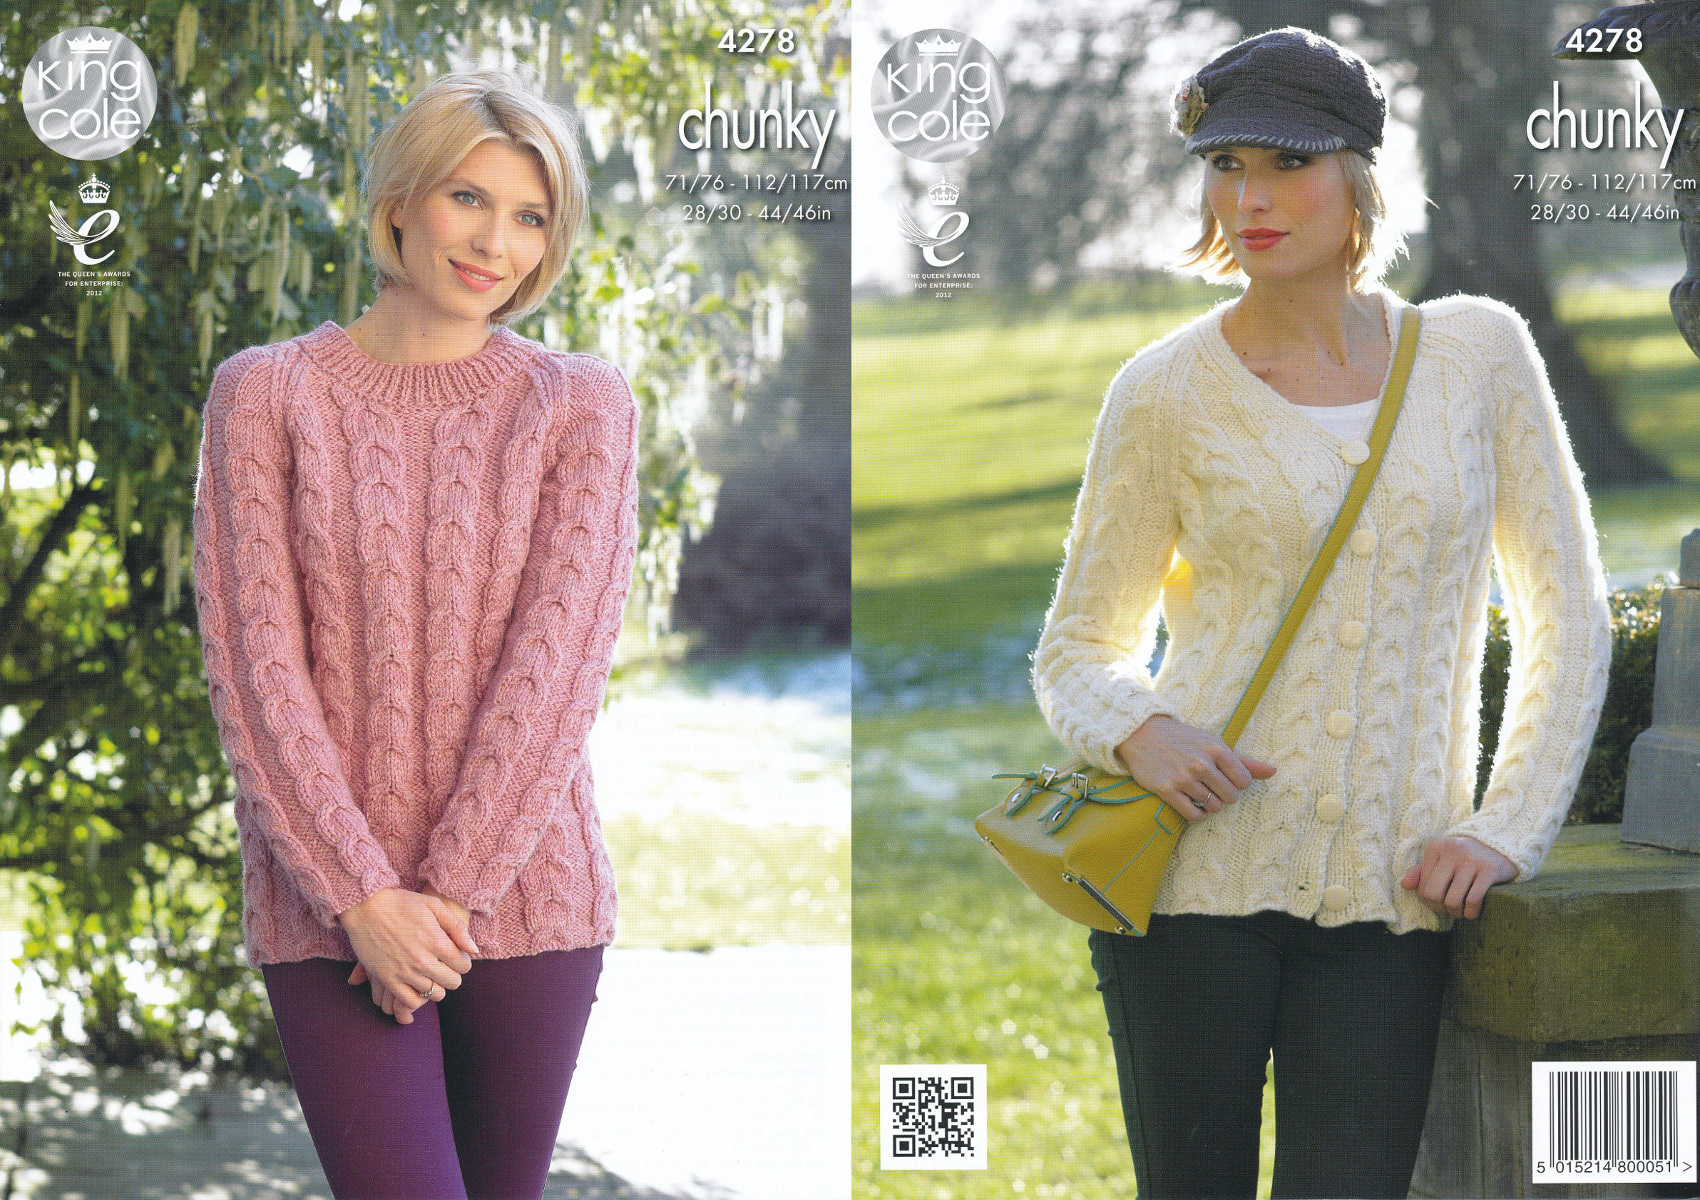 Jumper Knitting Patterns Details About King Cole Womens Chunky Knitting Pattern Ladies Cable Knit Sweater Cardigan 4278